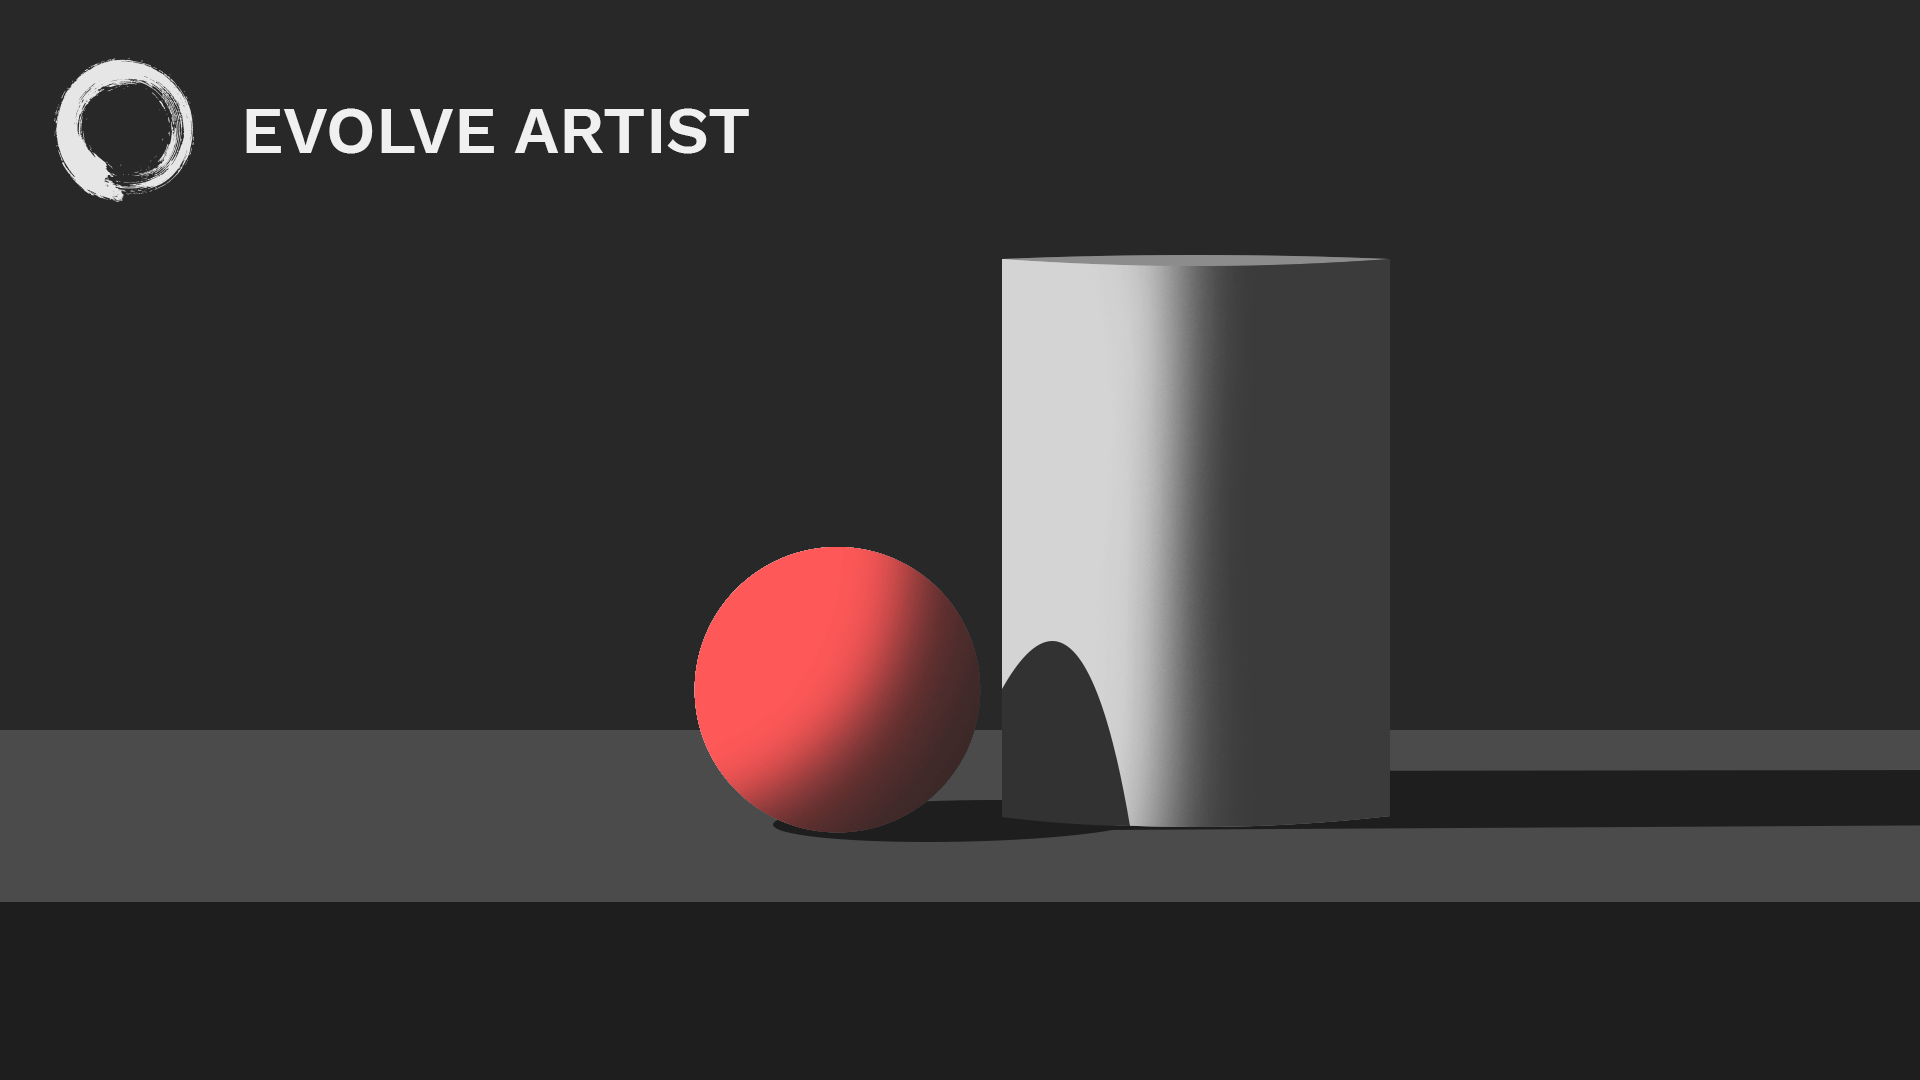 A cold light alters the color of an image of a ball and a can.